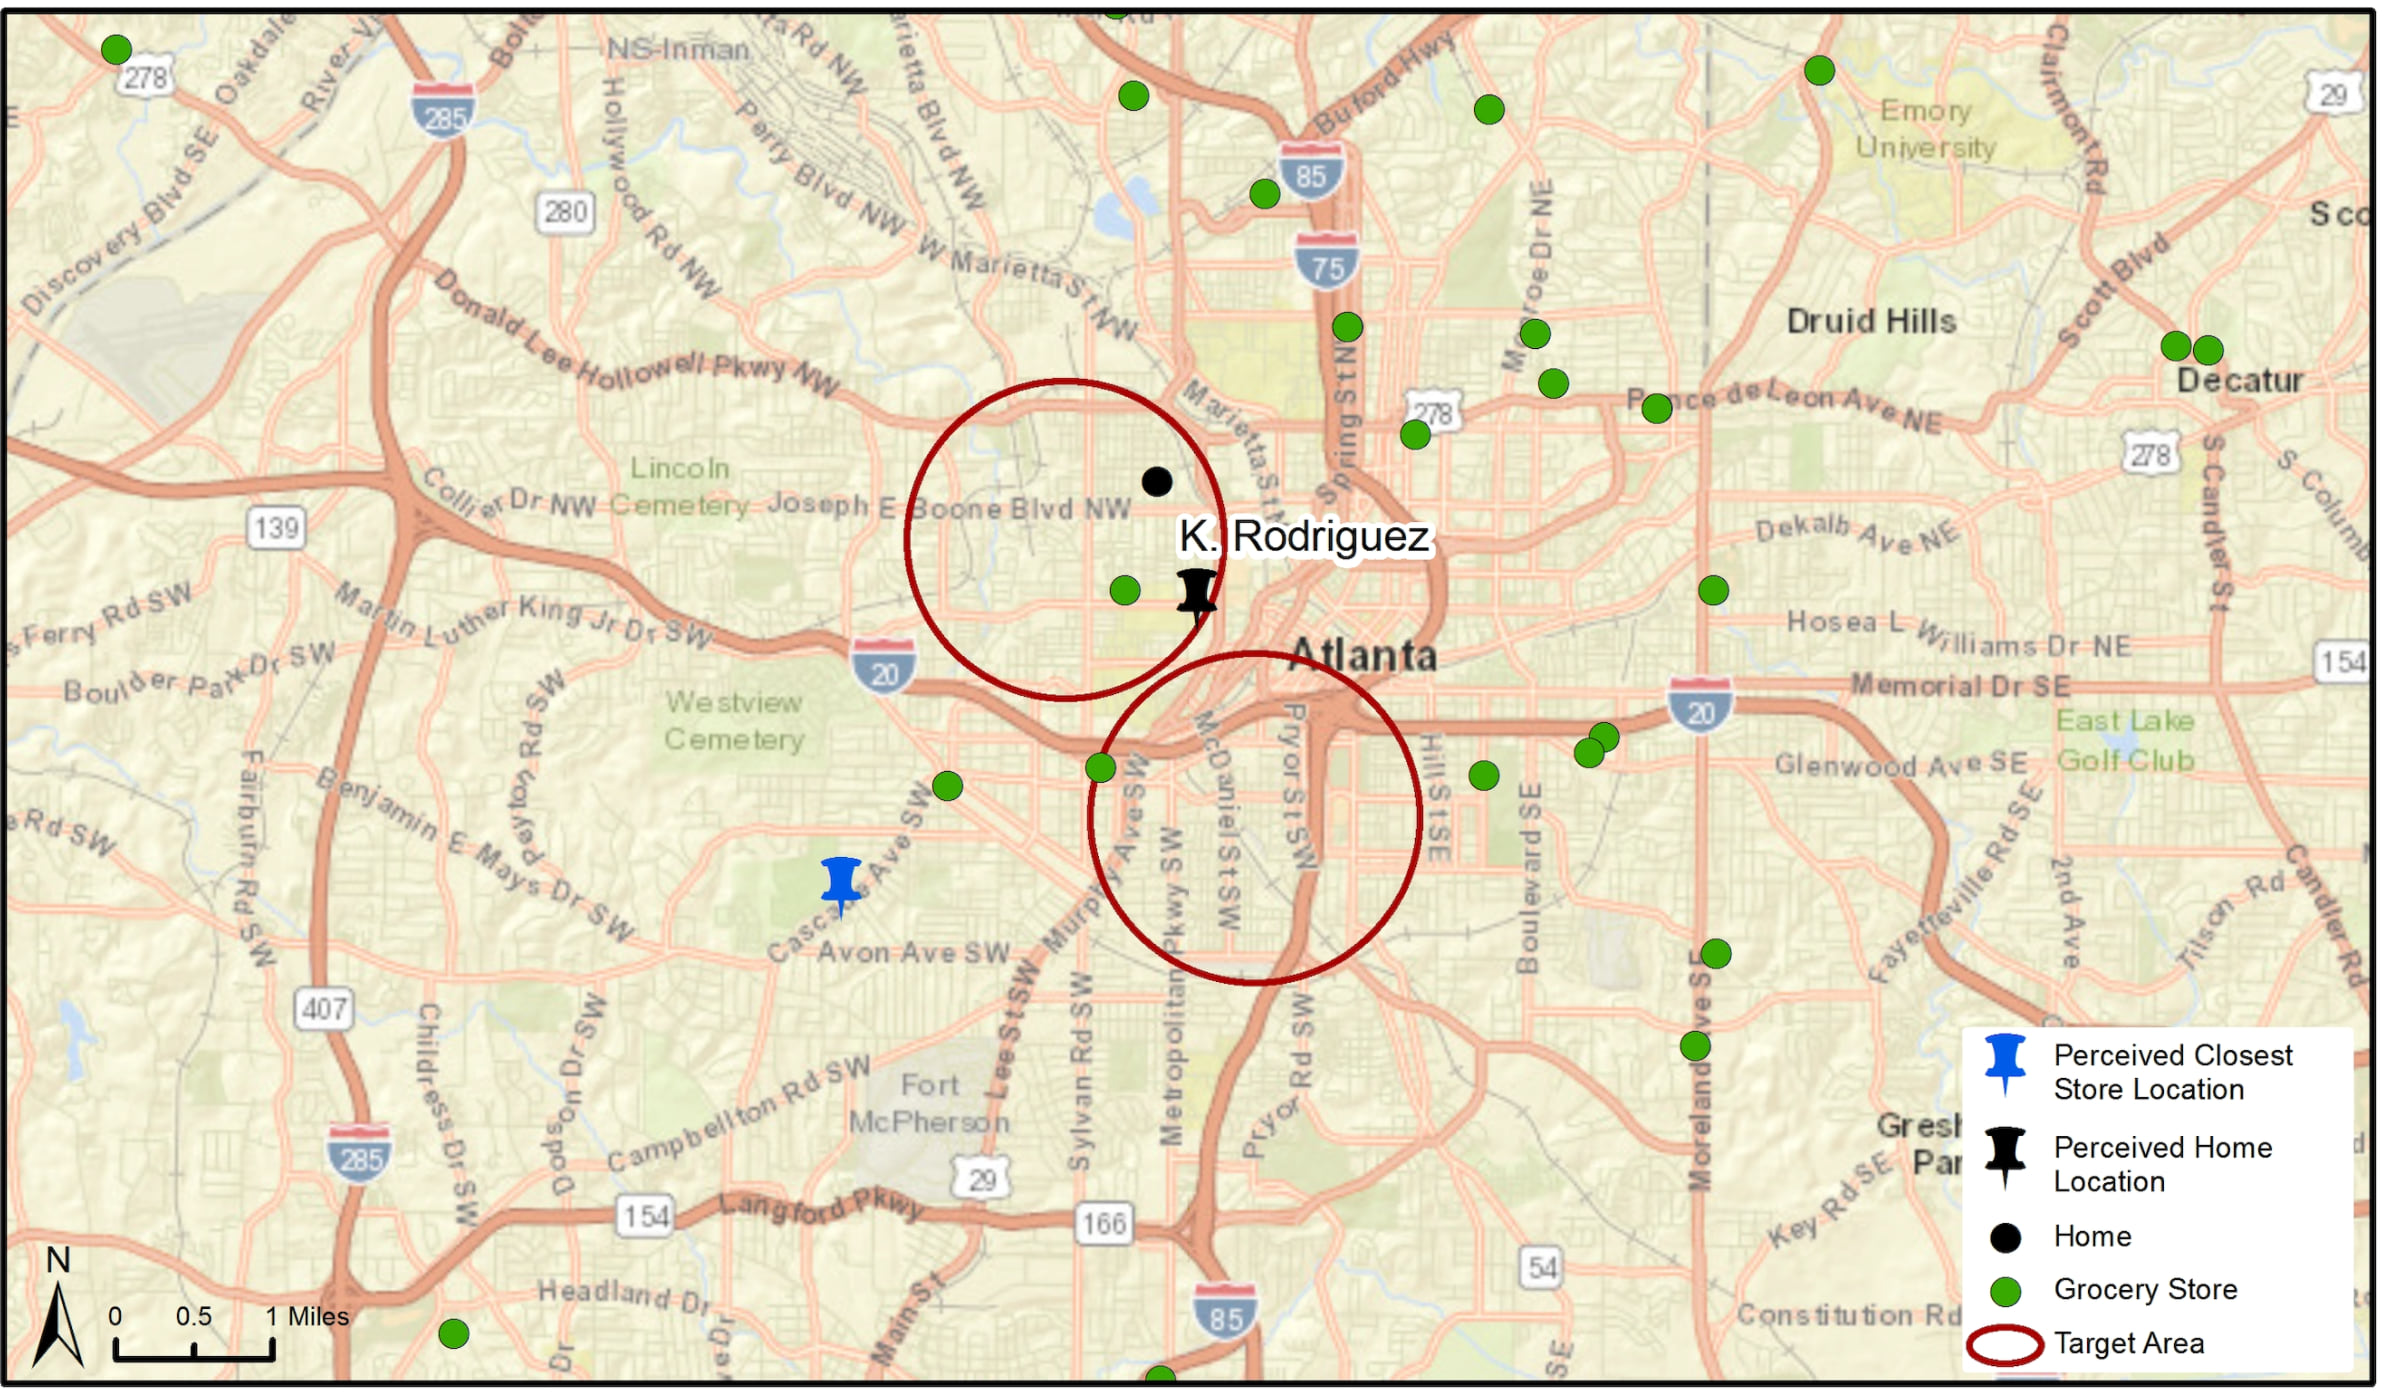 Map of Atlanta neighborhood participant’s perceived store location (blue pin) and home location (black pin), alongside there actual home location (black dot) and local grocery stores (green dots)